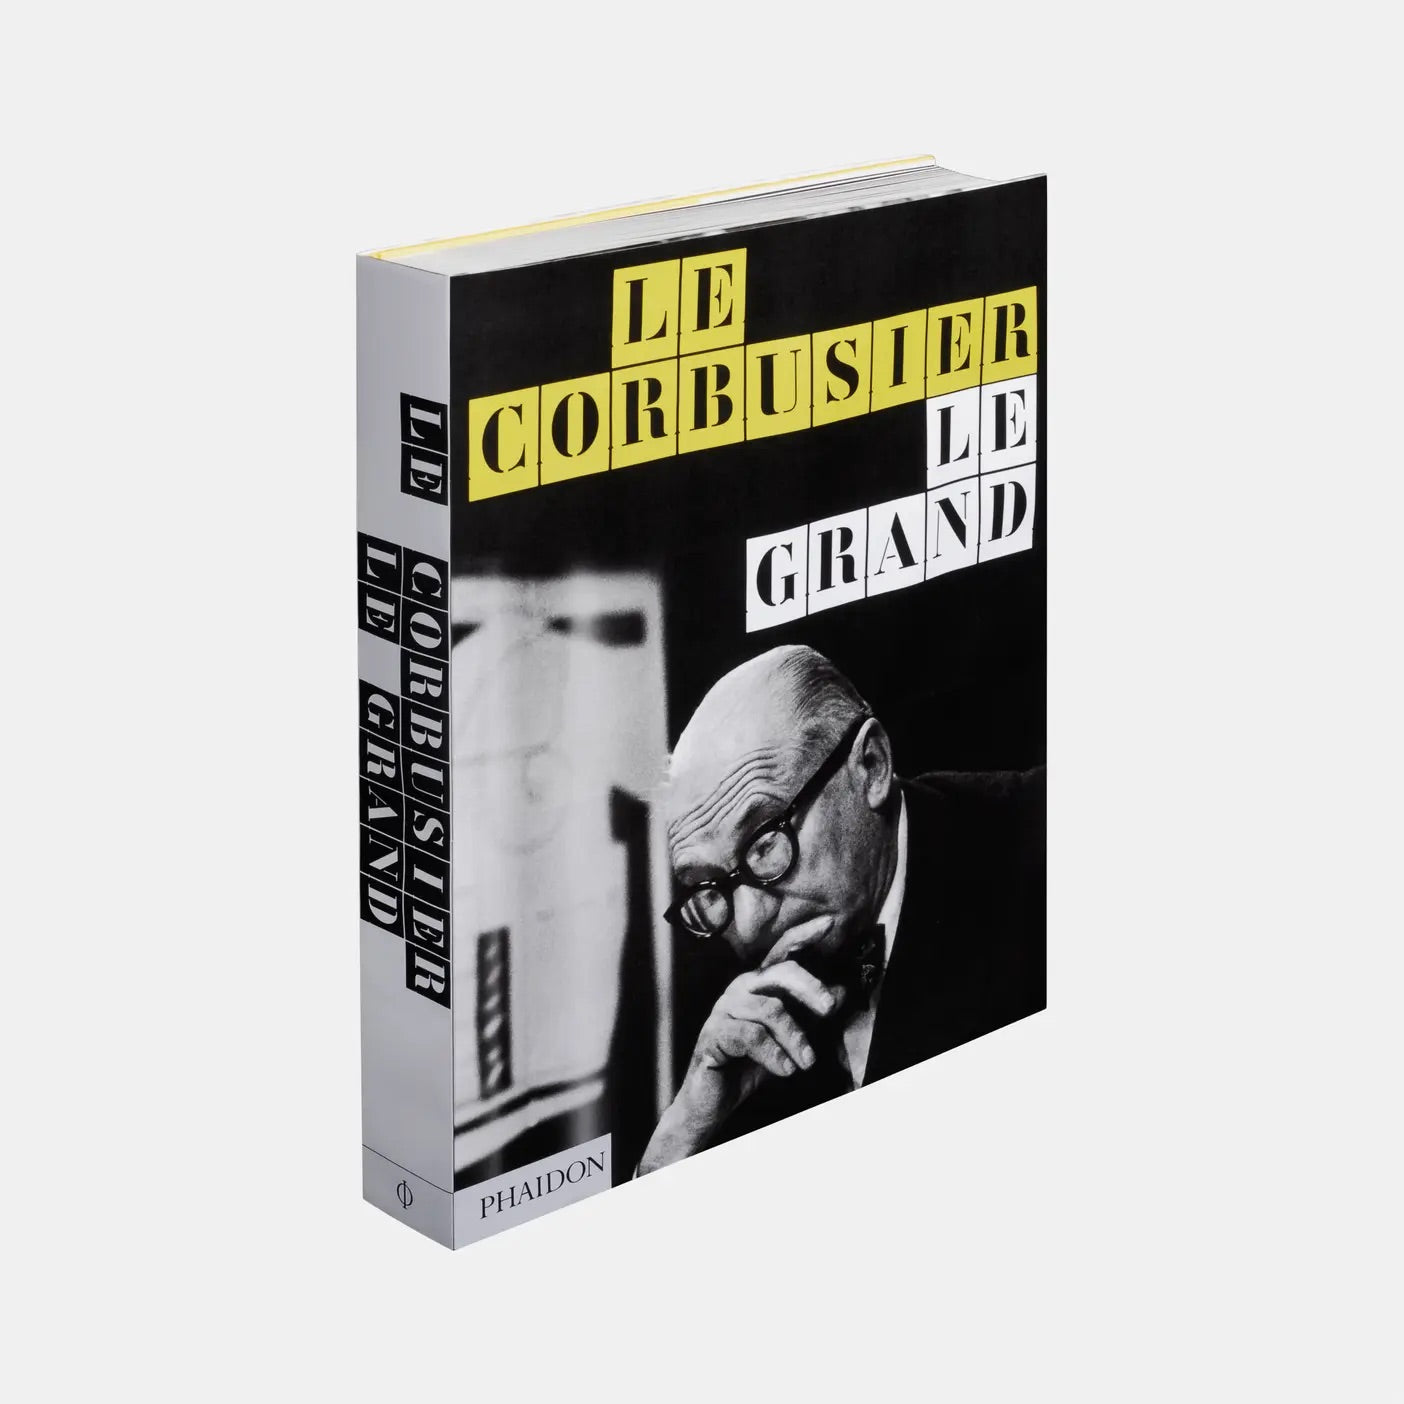 Le Corbusier Le Grand Conceived and edited by Phaidon Editors